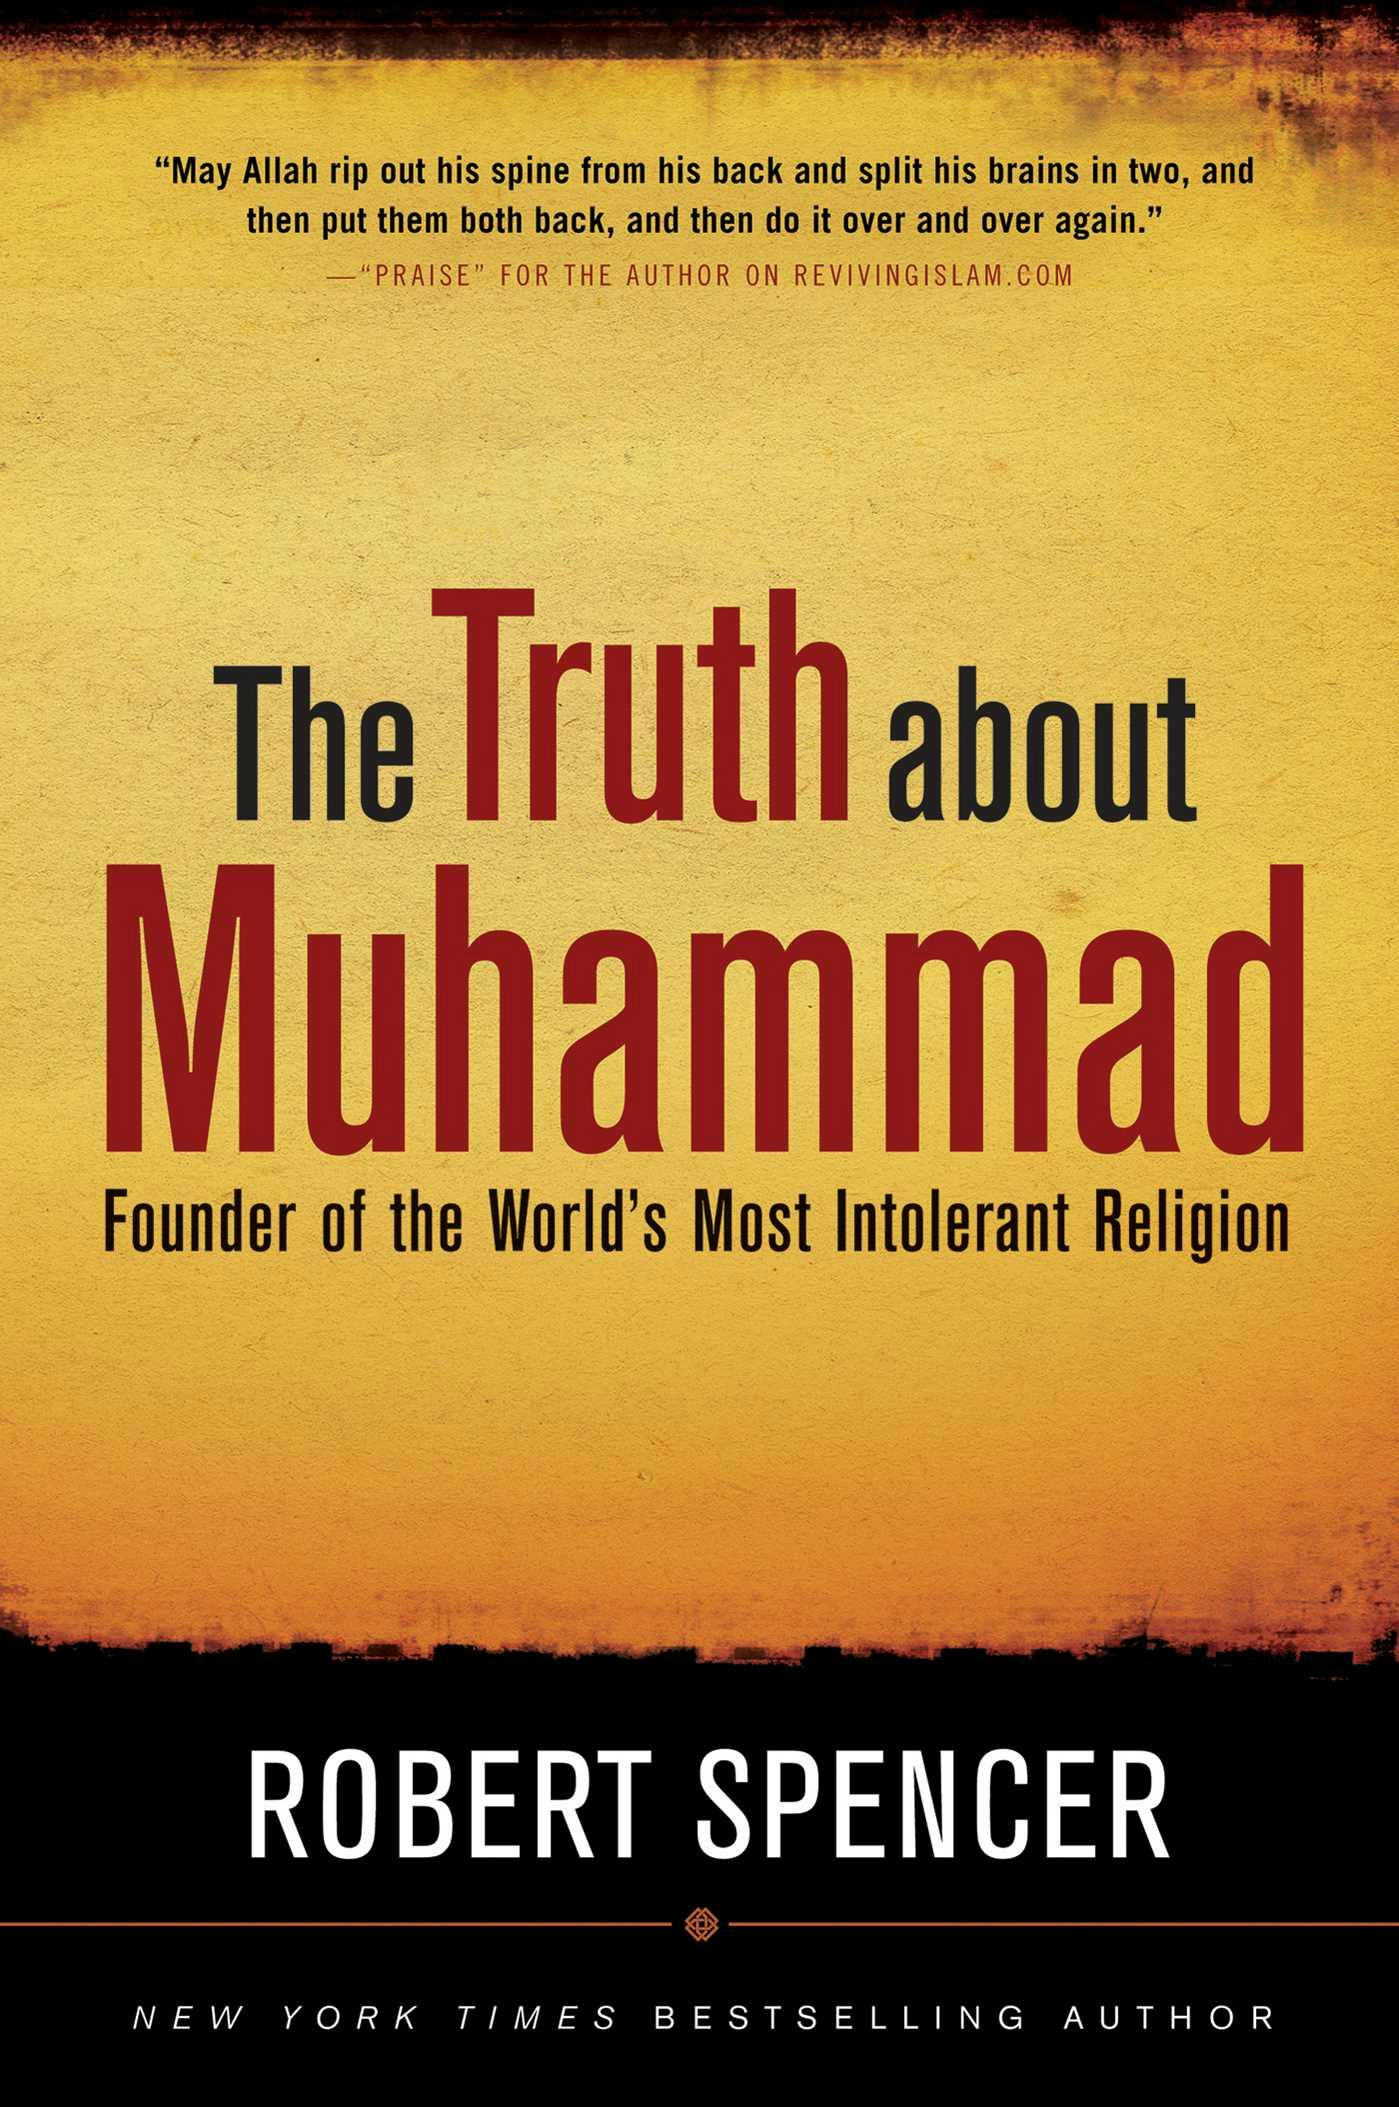 The Truth About Muhammad: Founder of the World's Most Intolerant Religion - Robert Spencer